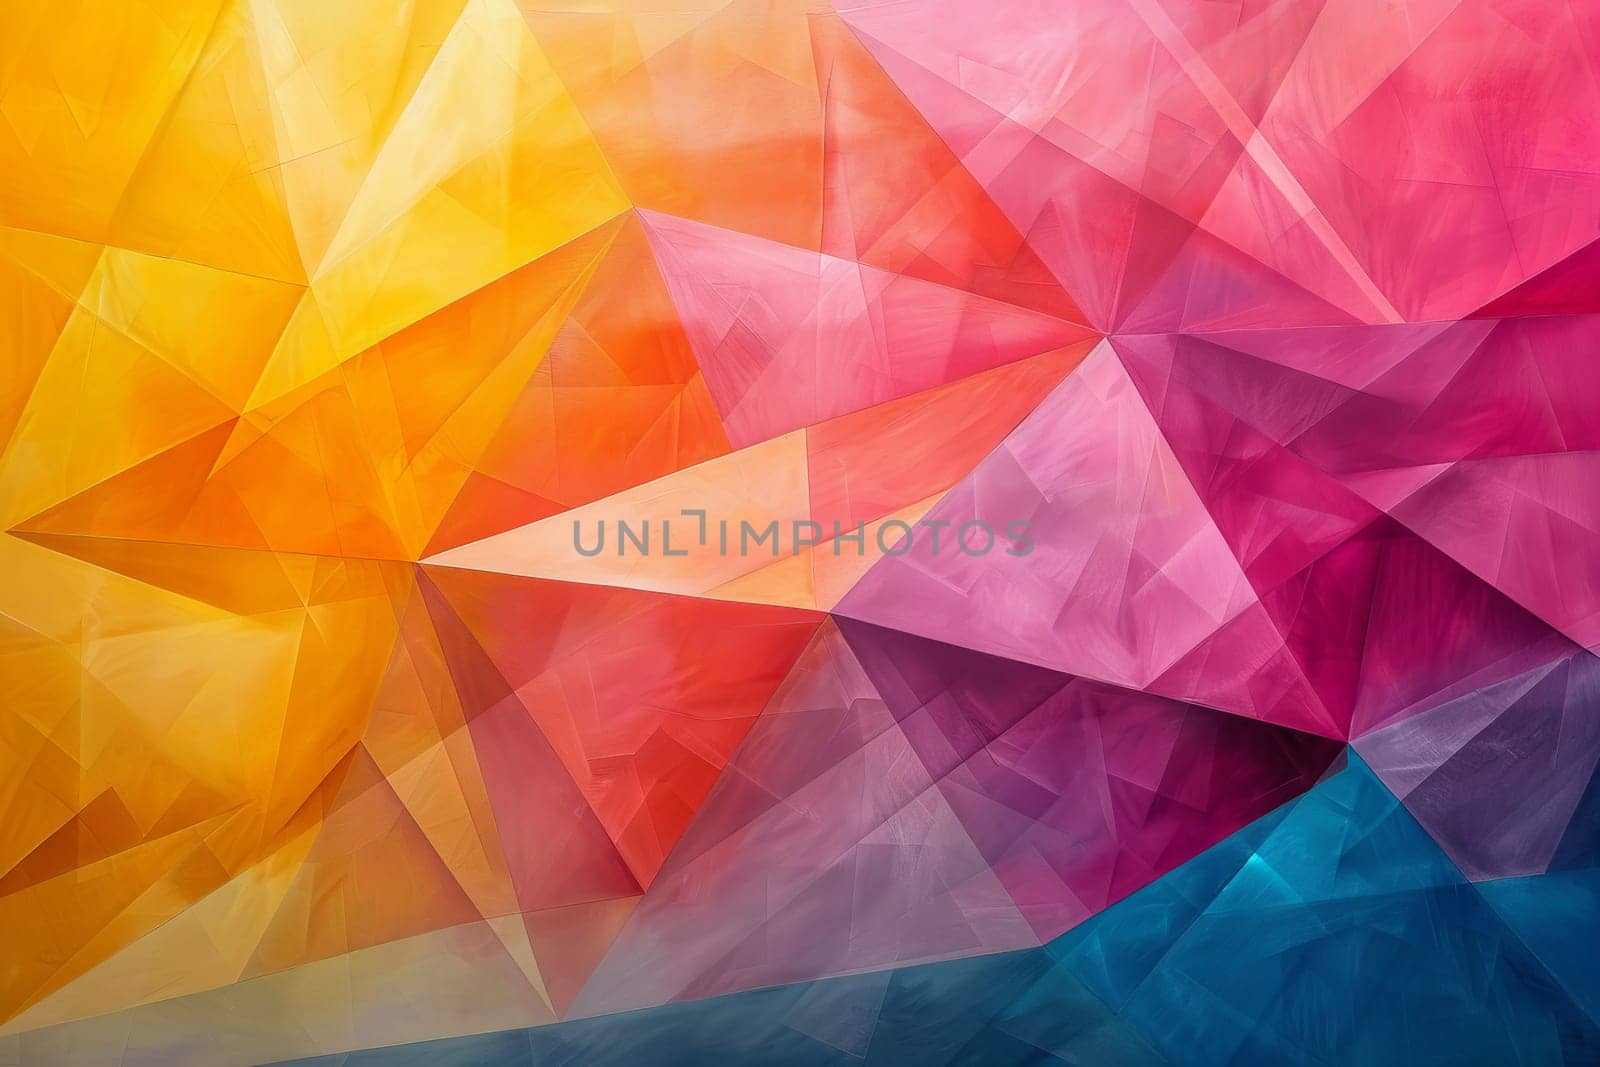 A colorful abstract painting with a lot of triangles and squares by itchaznong